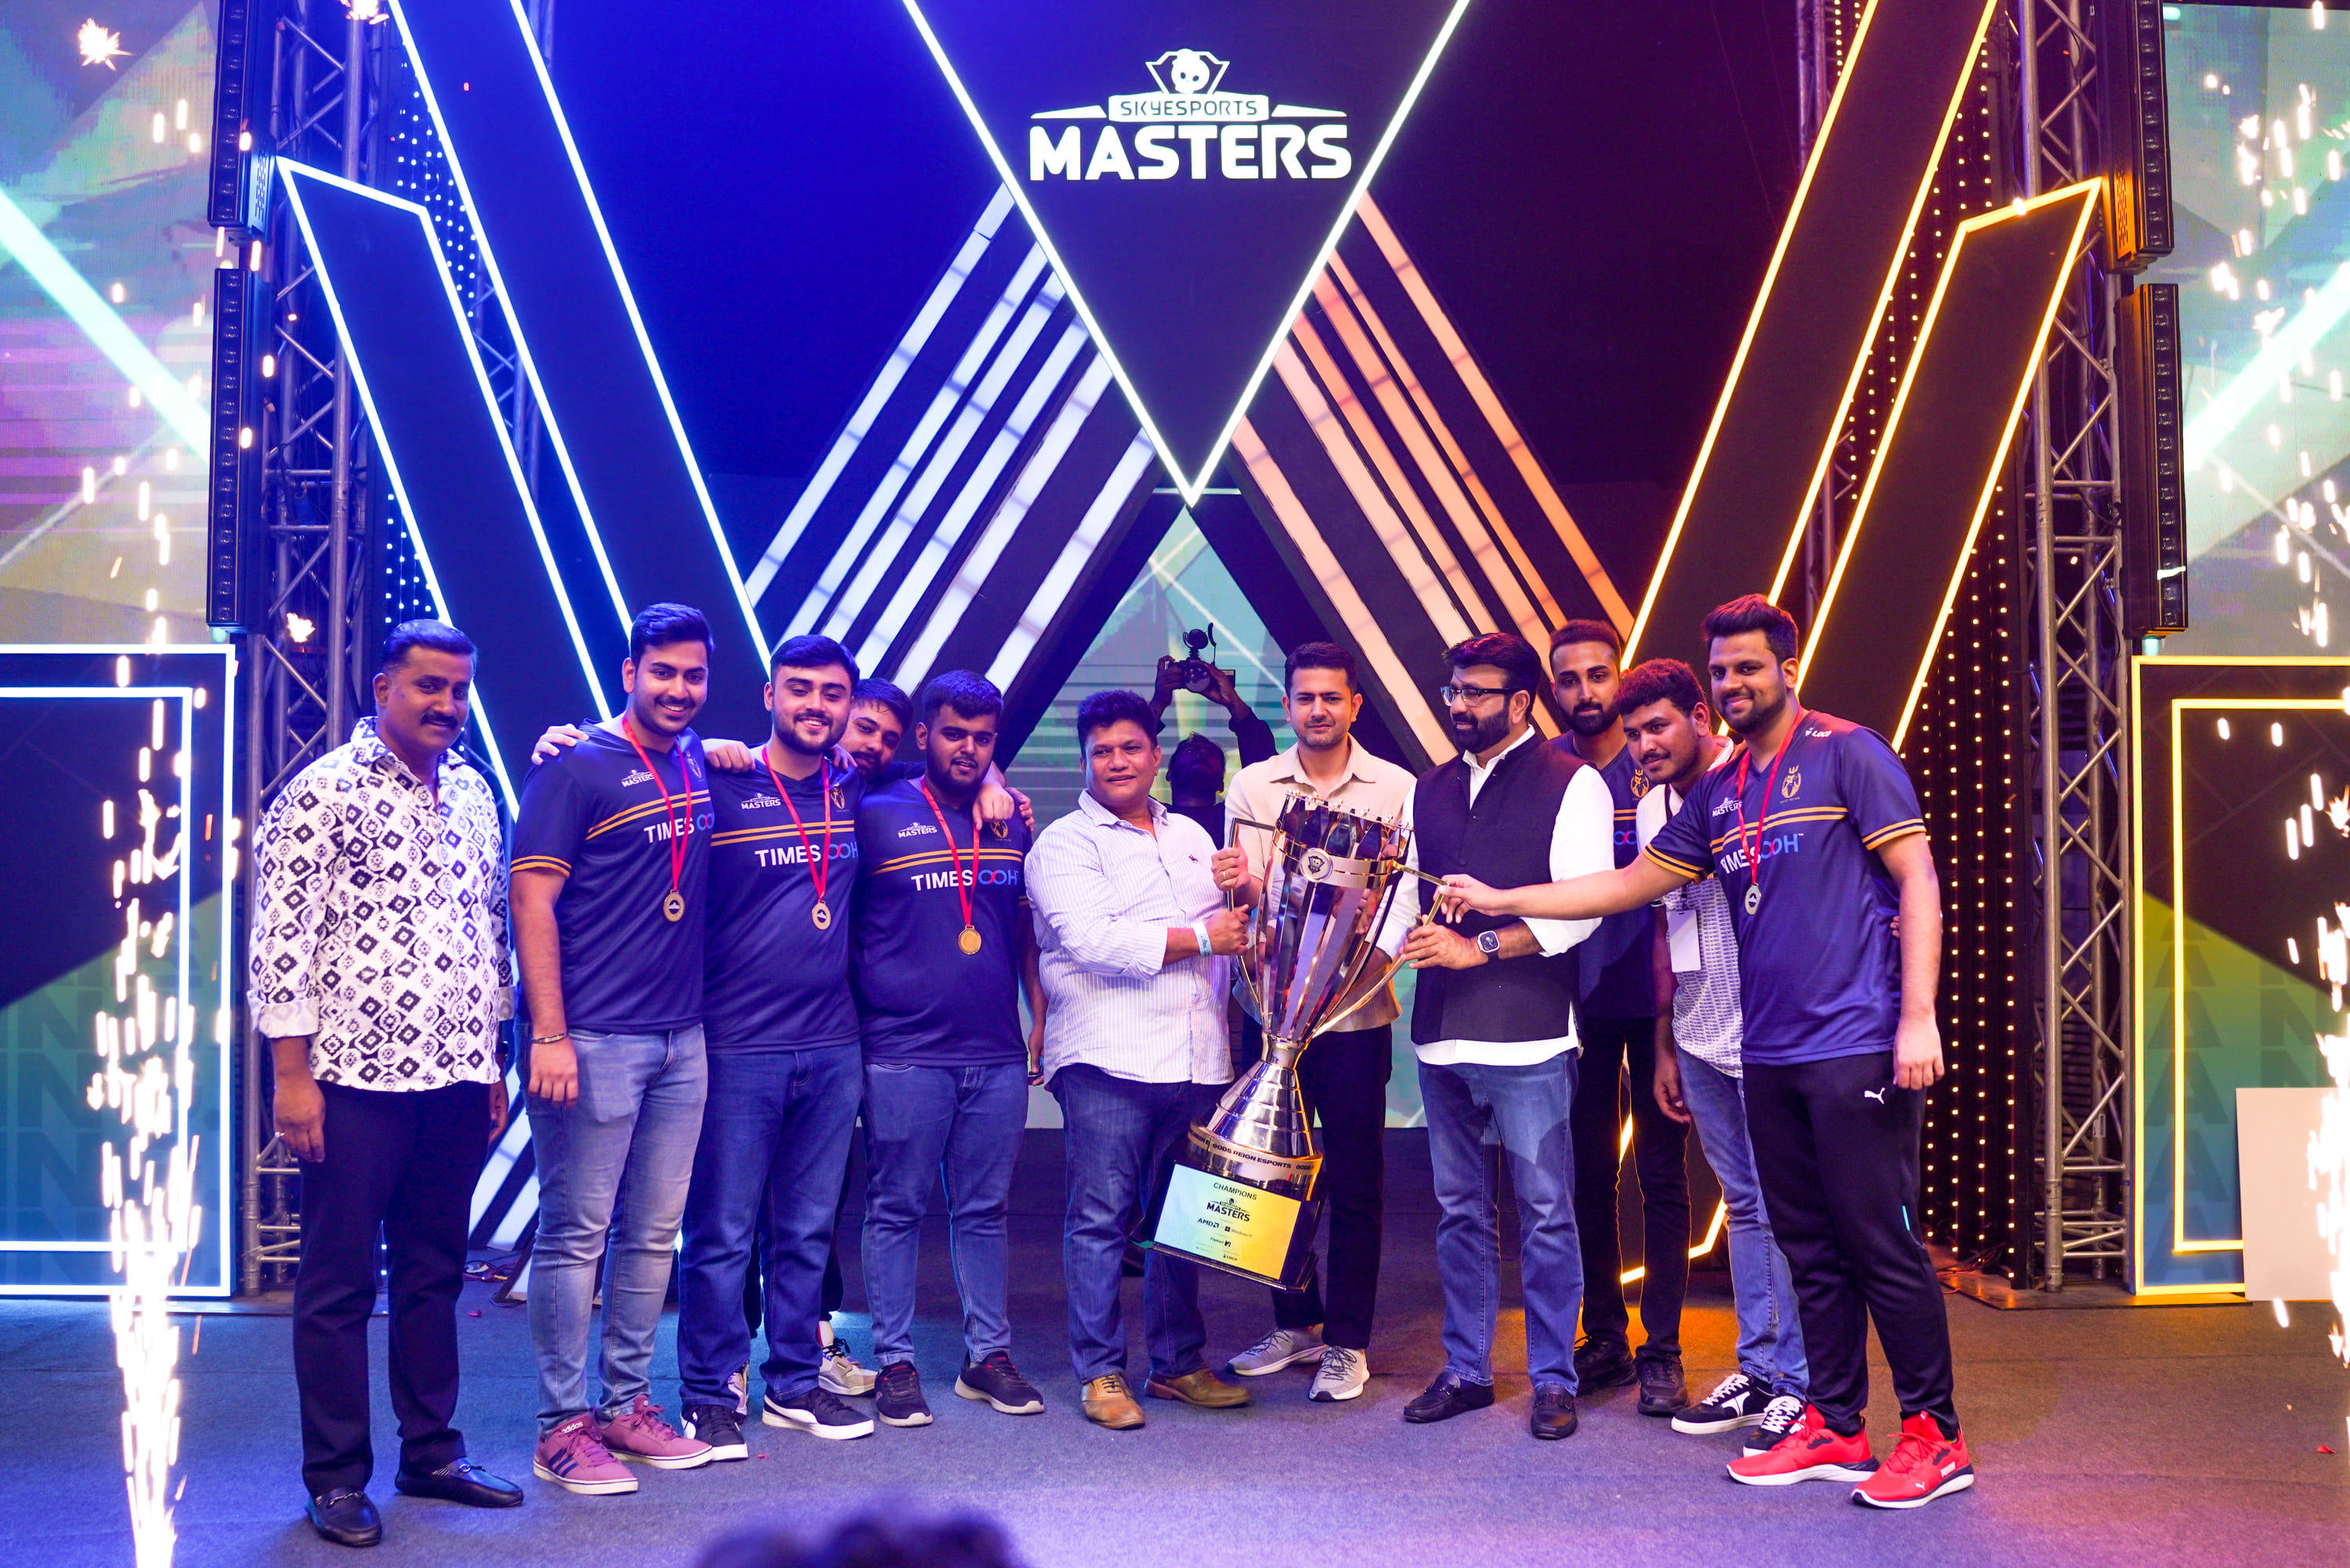 skyesports-masters:-gods-reign-crowned-champions-of-india’s-first-franchised-esports-tournament;-bag-major-chunk-of-inr-2-crore-prize-pool